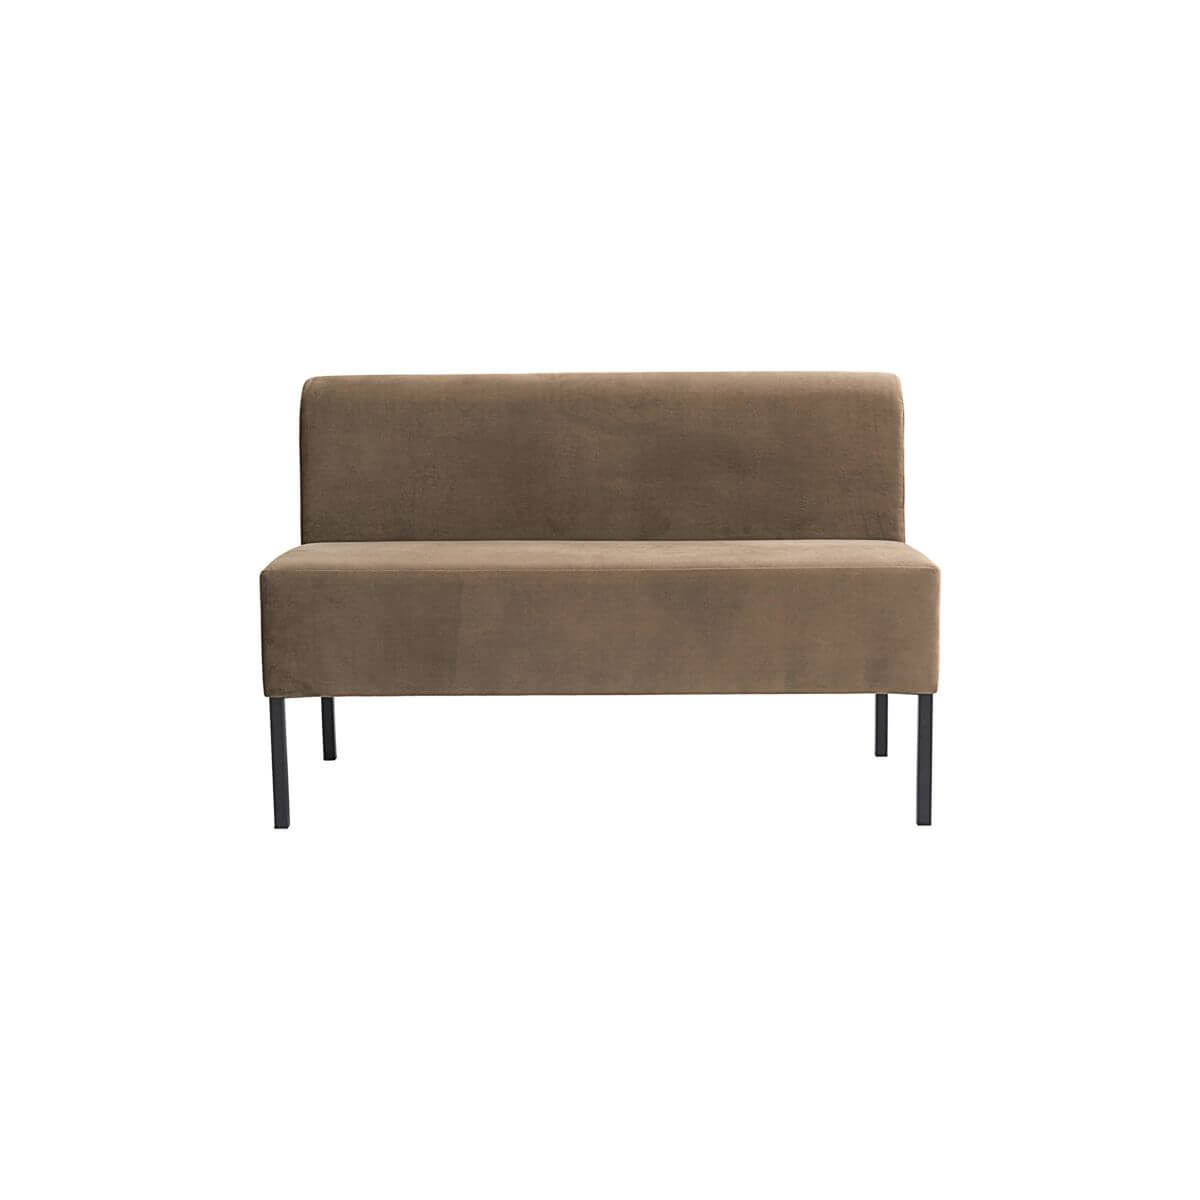 House Doctor Sofa 2 seater Zand 80 X 60 X 120 ZITHOOGTE 48